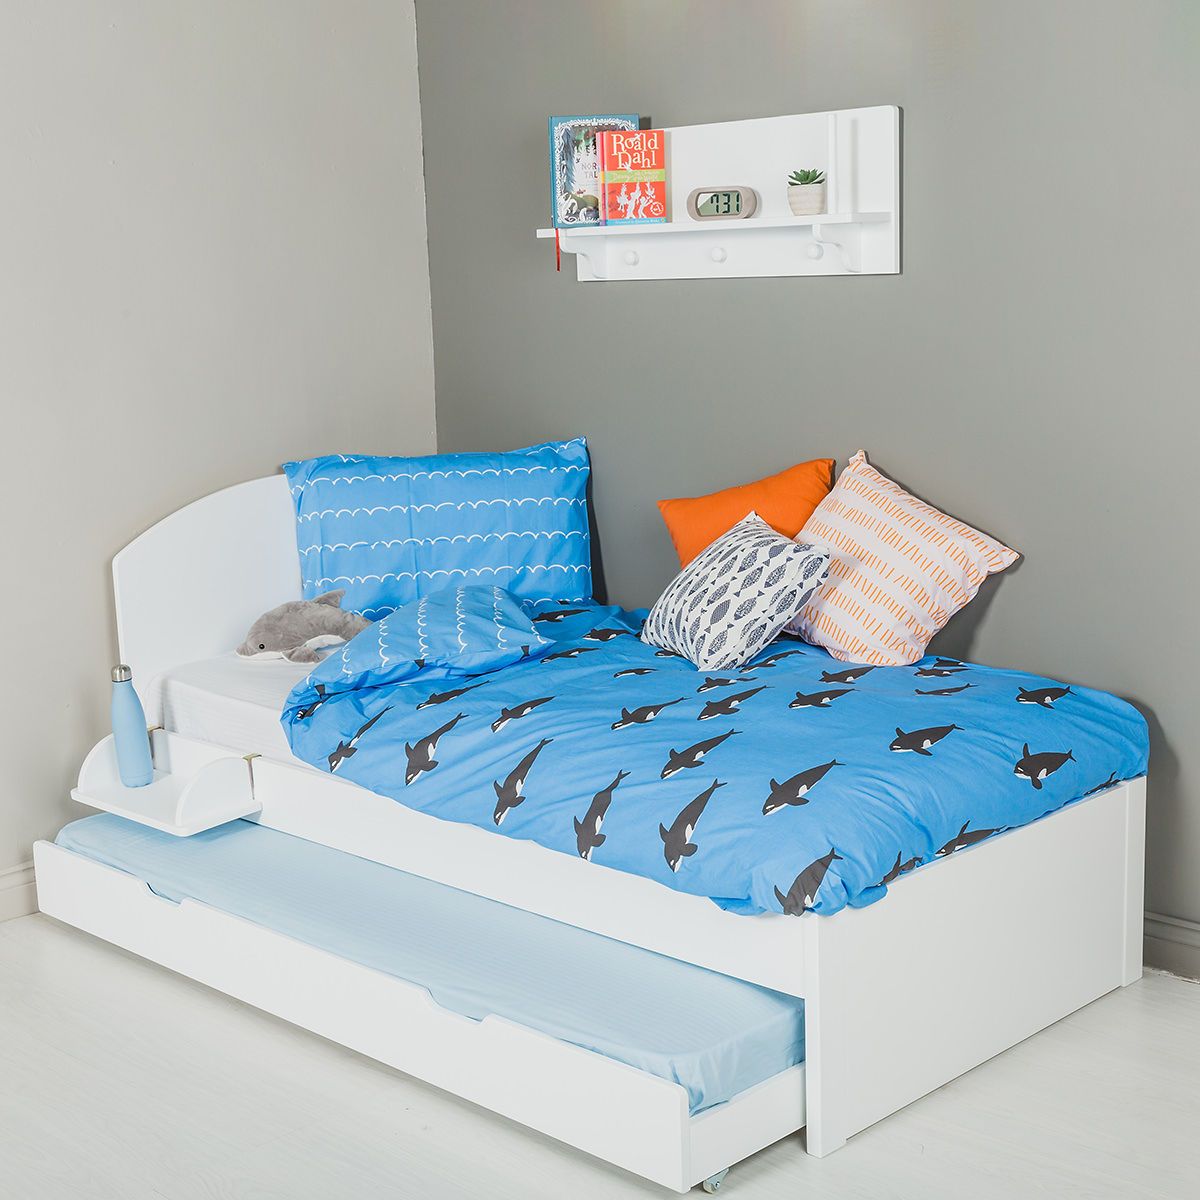 The Colourful Children's Single Bed - White